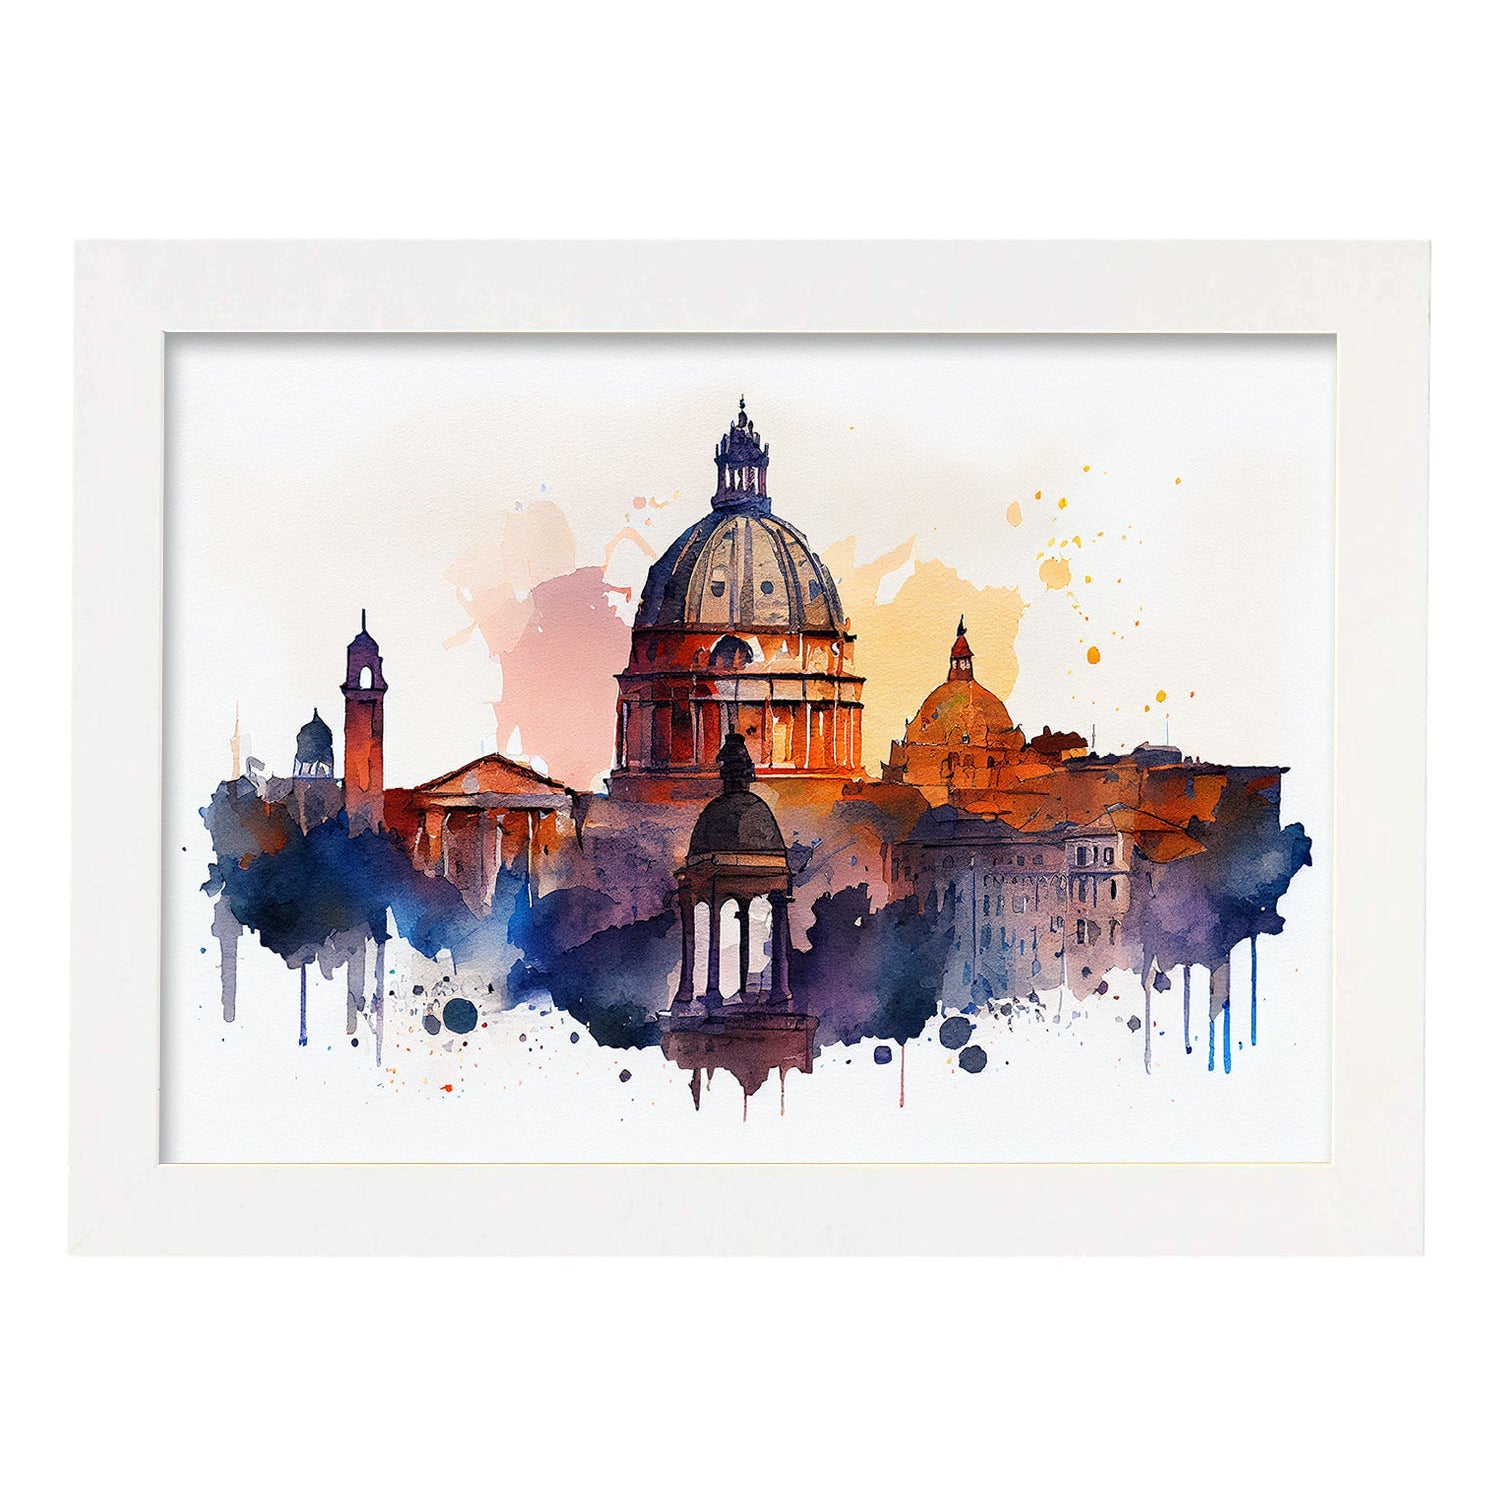 Nacnic watercolor of a skyline of the city of Rome_2. Aesthetic Wall Art Prints for Bedroom or Living Room Design.-Artwork-Nacnic-A4-Marco Blanco-Nacnic Estudio SL